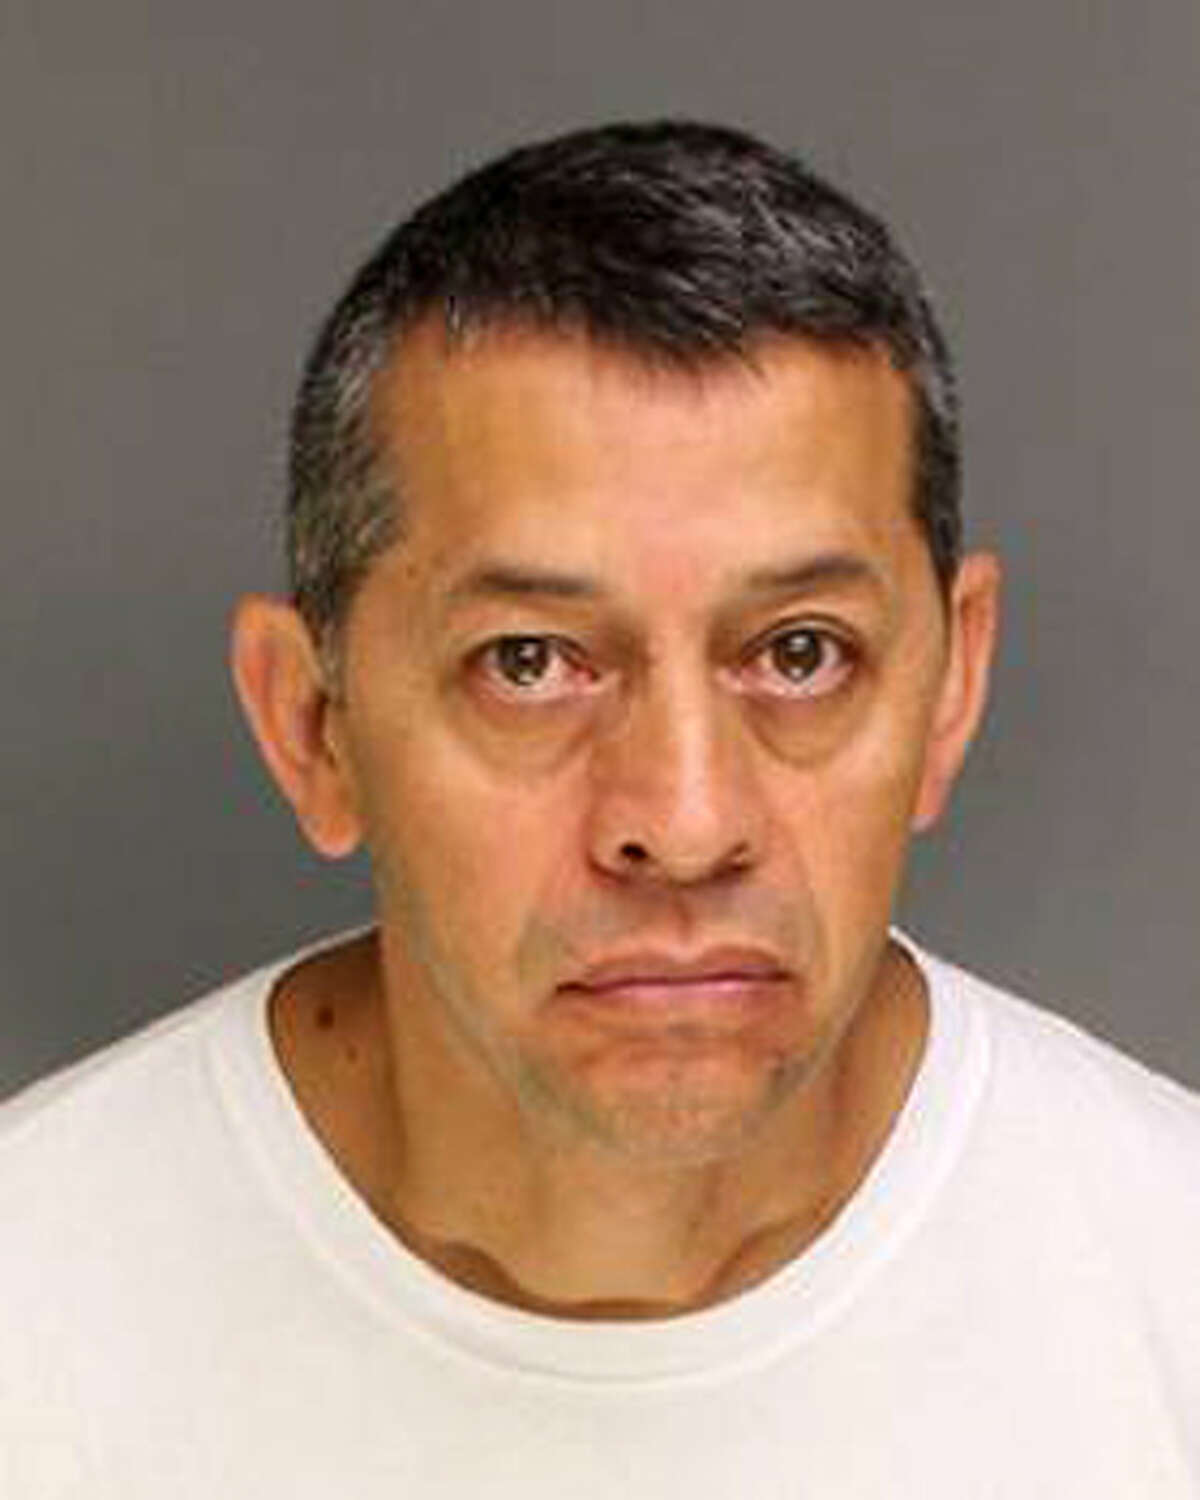 Gonzalo Flores was charged with fourth-degree sexual assault. Flores is accused of engaging in sexually inappropriate behavior with a patient while the suspect was working as a certified nursing assistant at St. Vincent's Medical Center in Bridgeport, Conn.